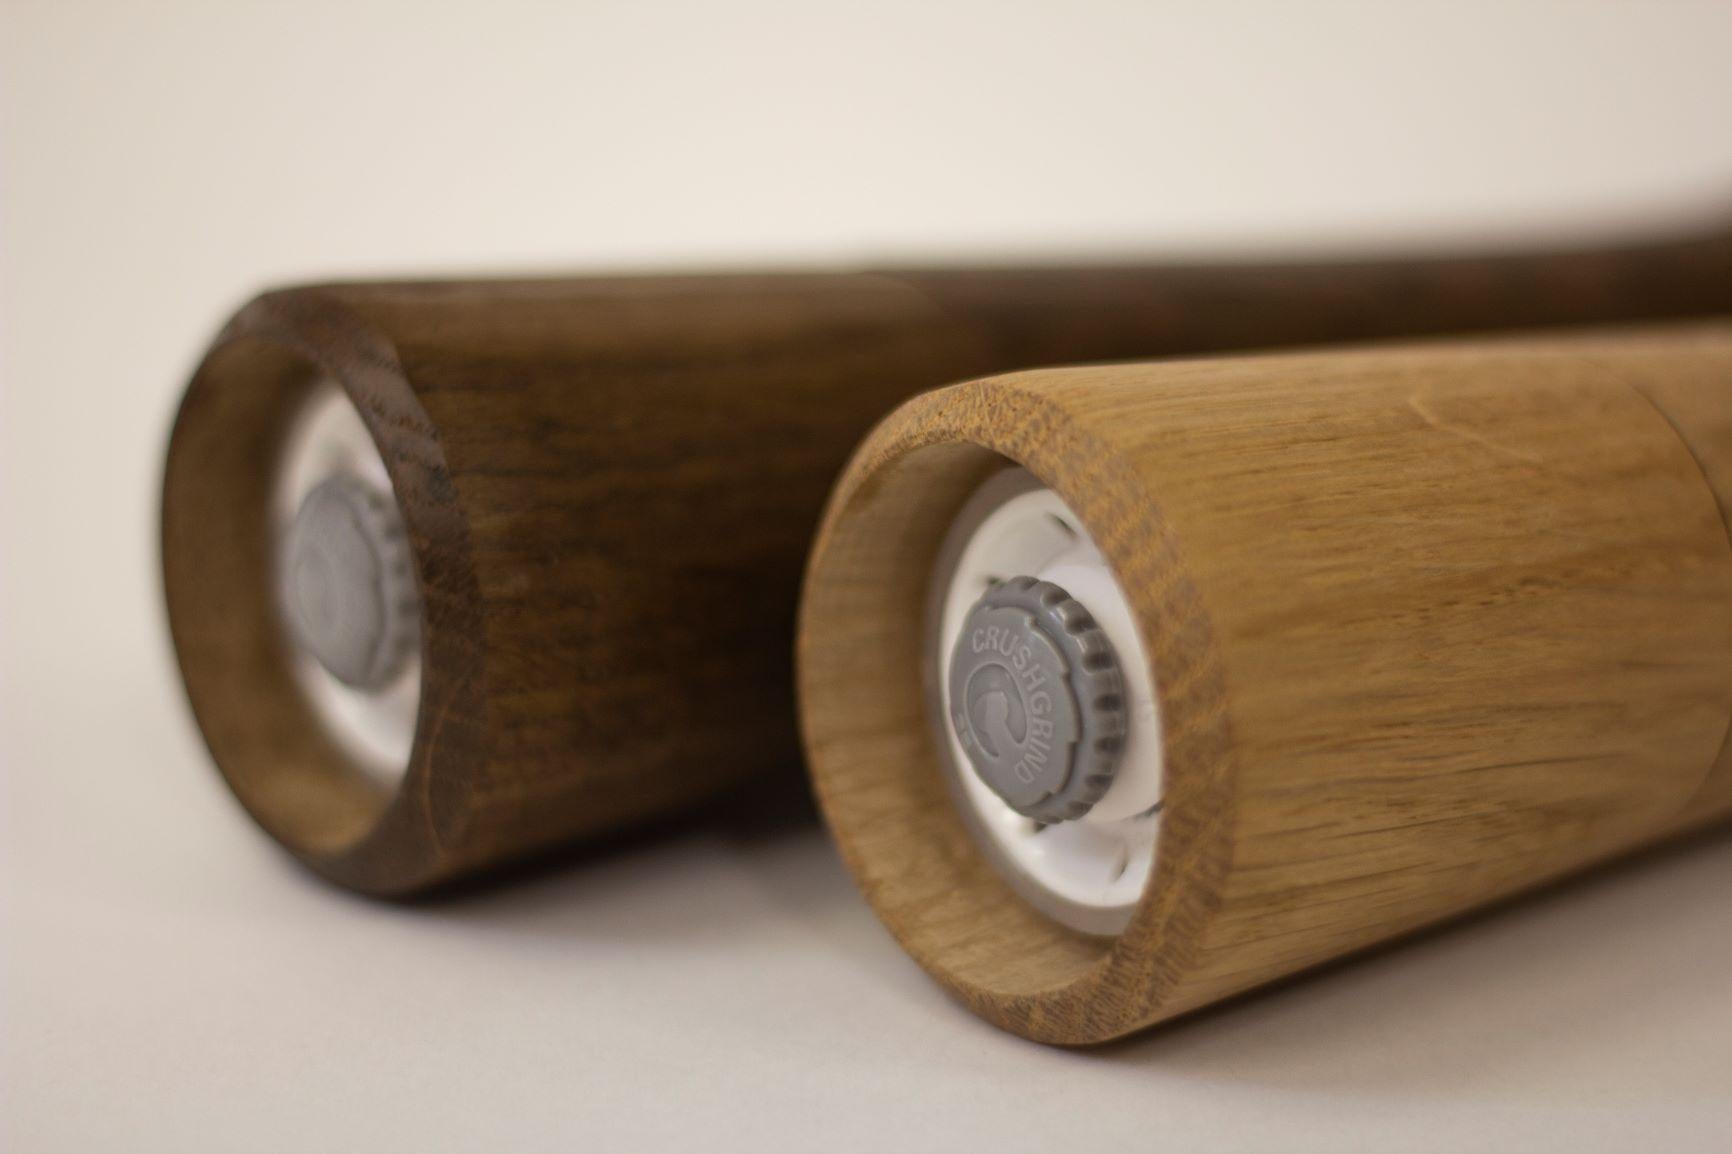 Our salt and pepper mills are hand turned from solid English oak here in Norfolk, England. We work closely with local timber suppliers to ensure the quality of the oak and it's local provenance and sustainability.
They are available in two colors,